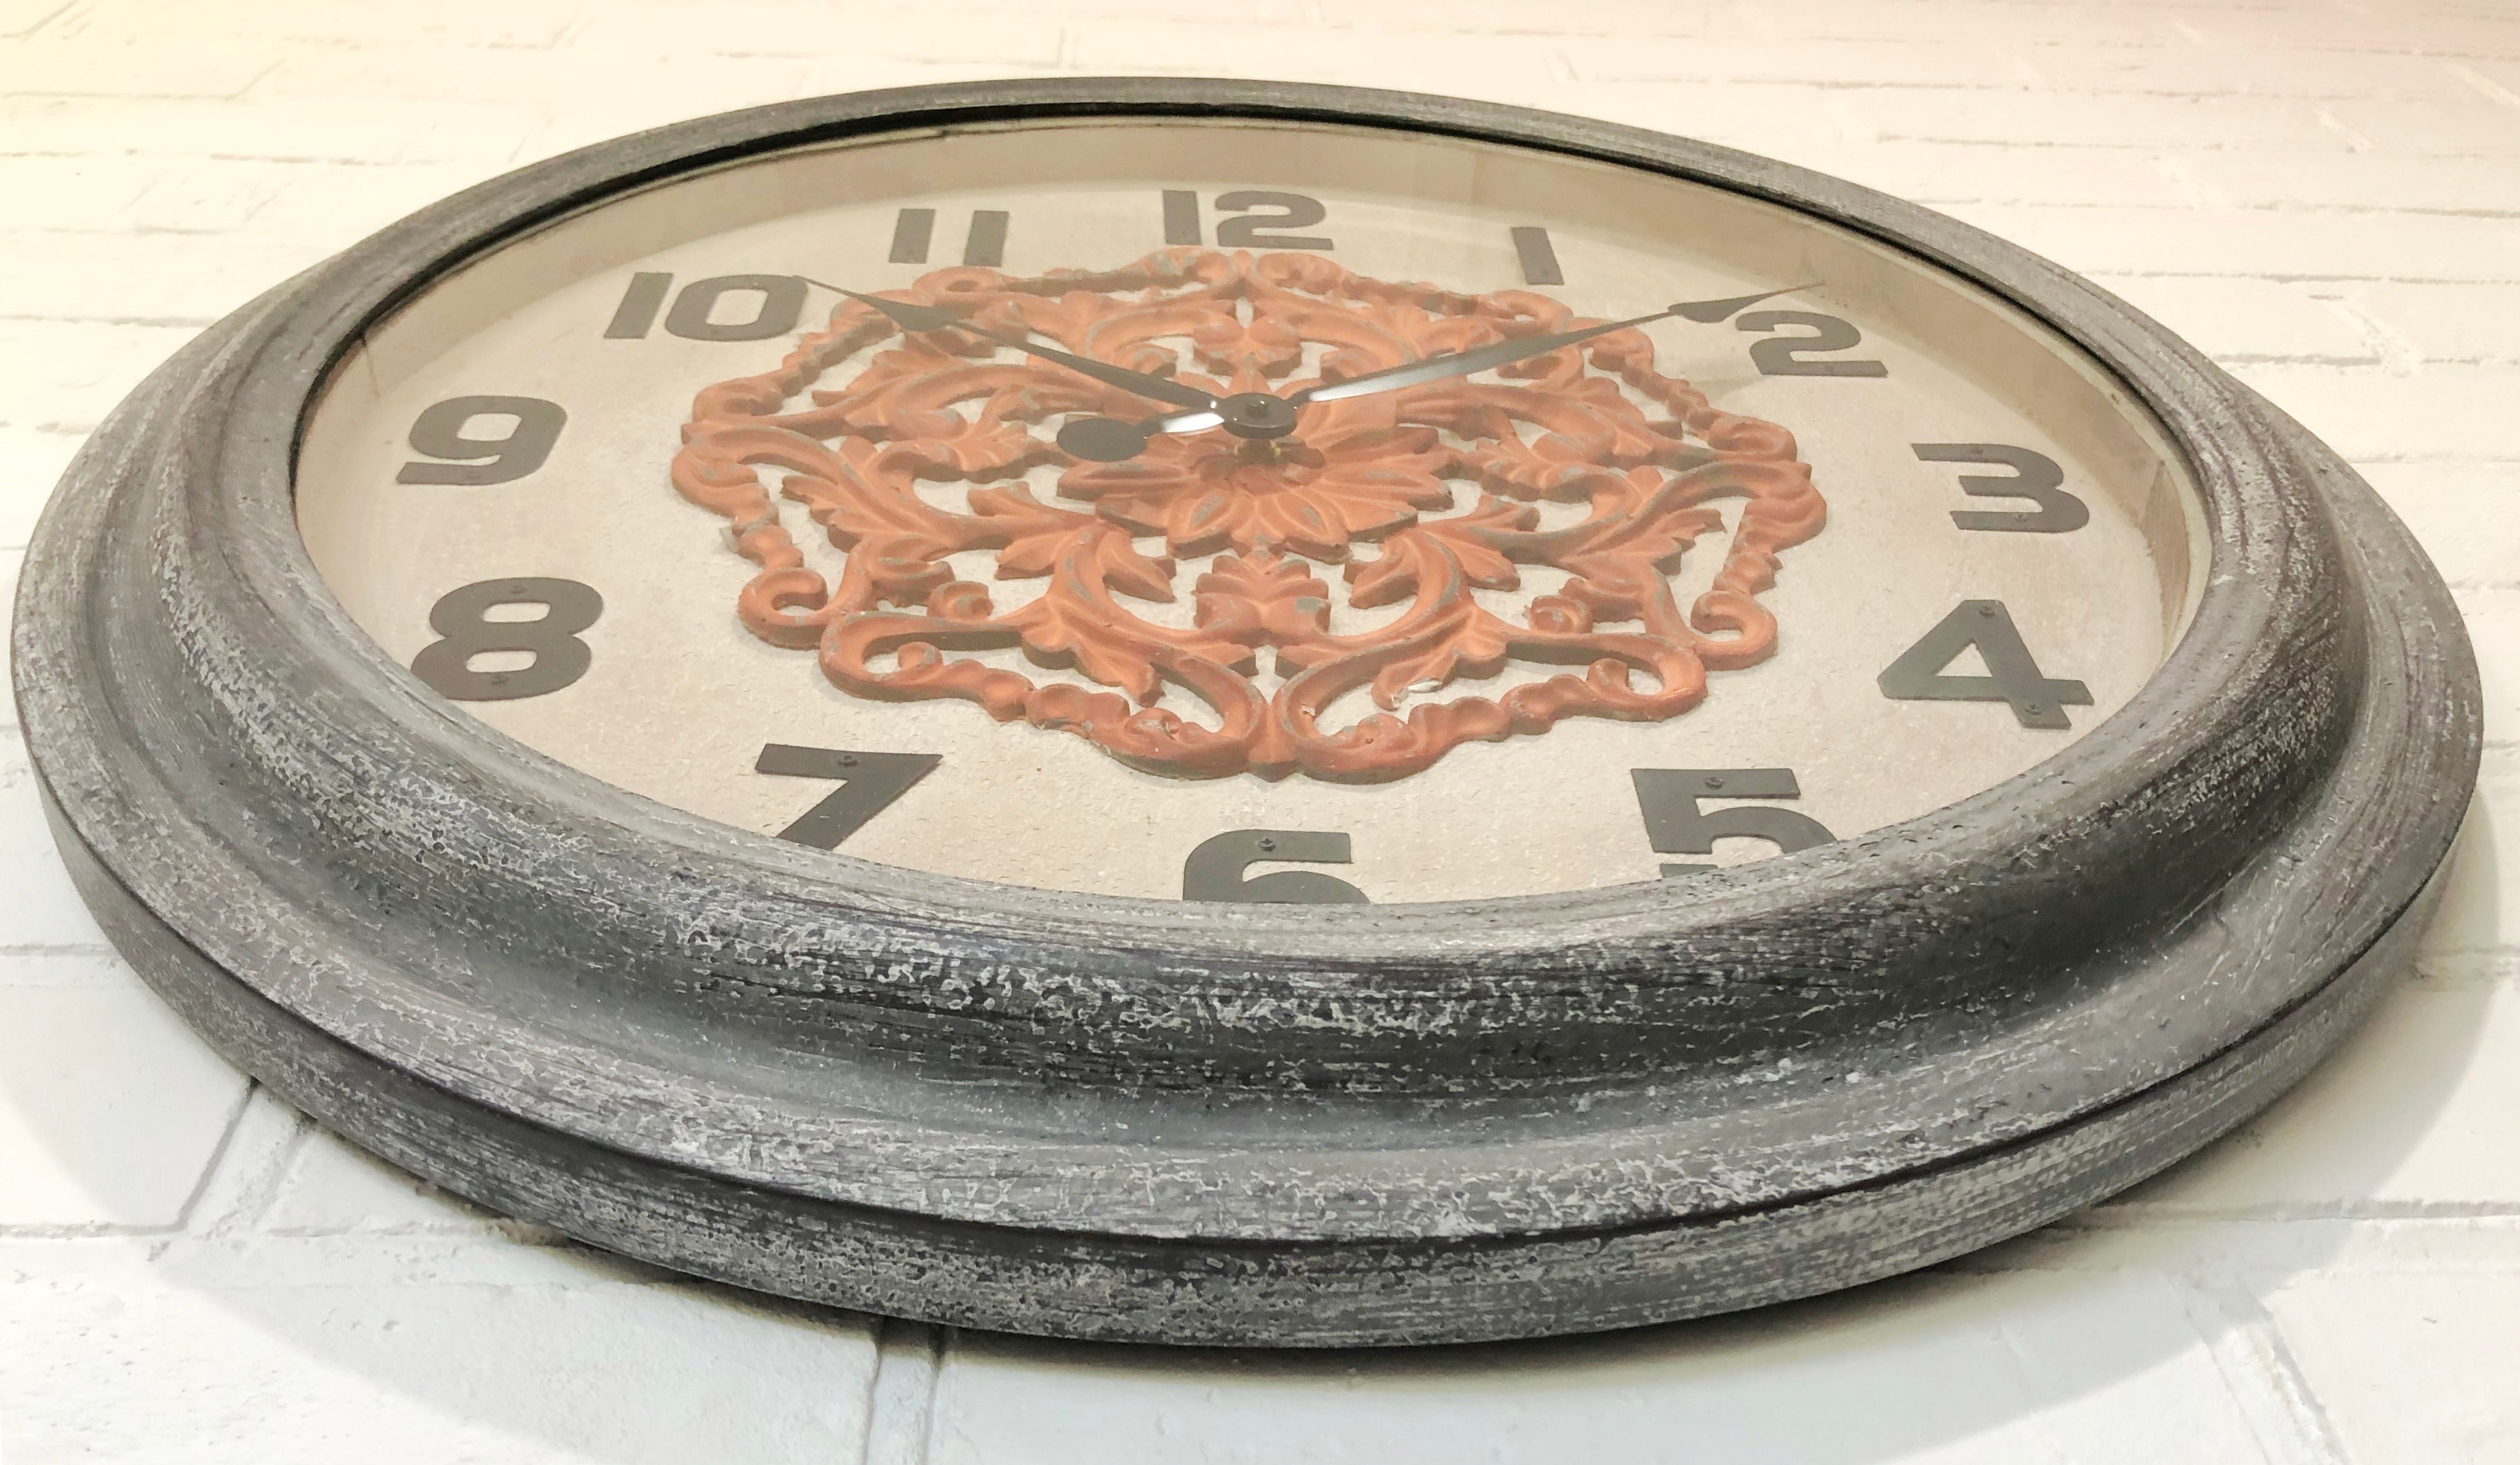 NEW Industrial Metal Abstract Round Battery Wall Clock | eXibit collection